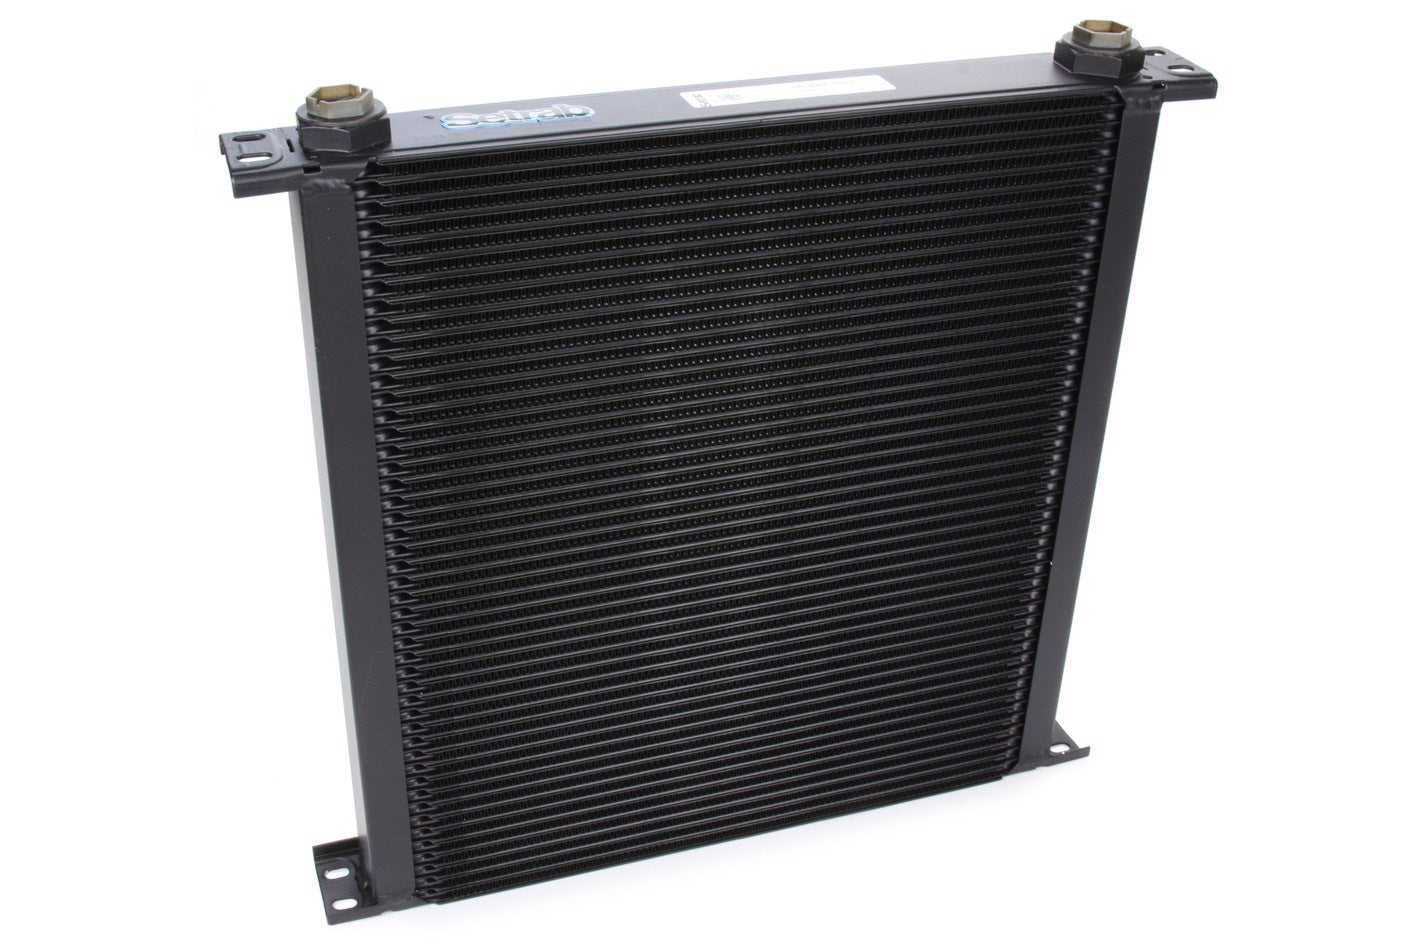 Setrab Standard Oil Coolers - Series 9 - 48 Row Oil Cooler - M22 Ports